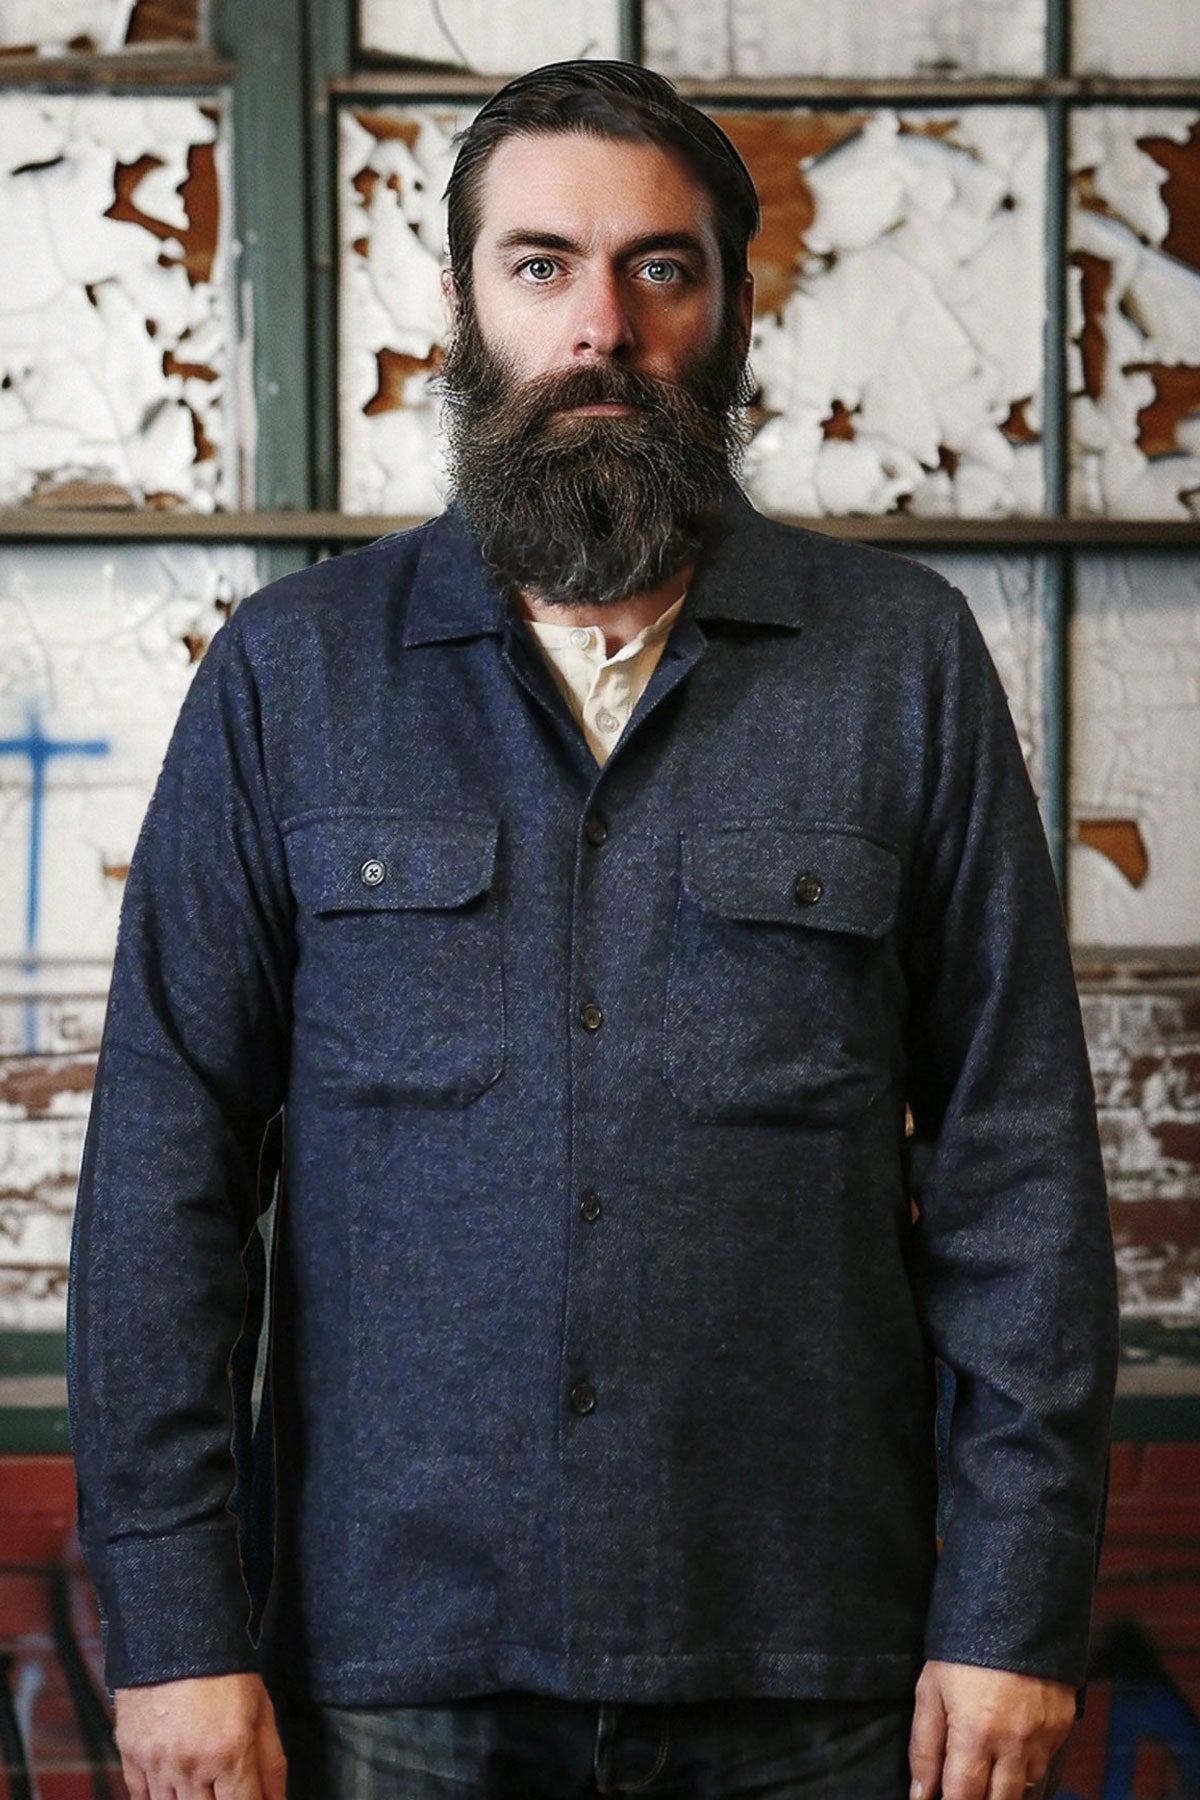 Universal Works - Soft Flannel Utility Shirt in Navy